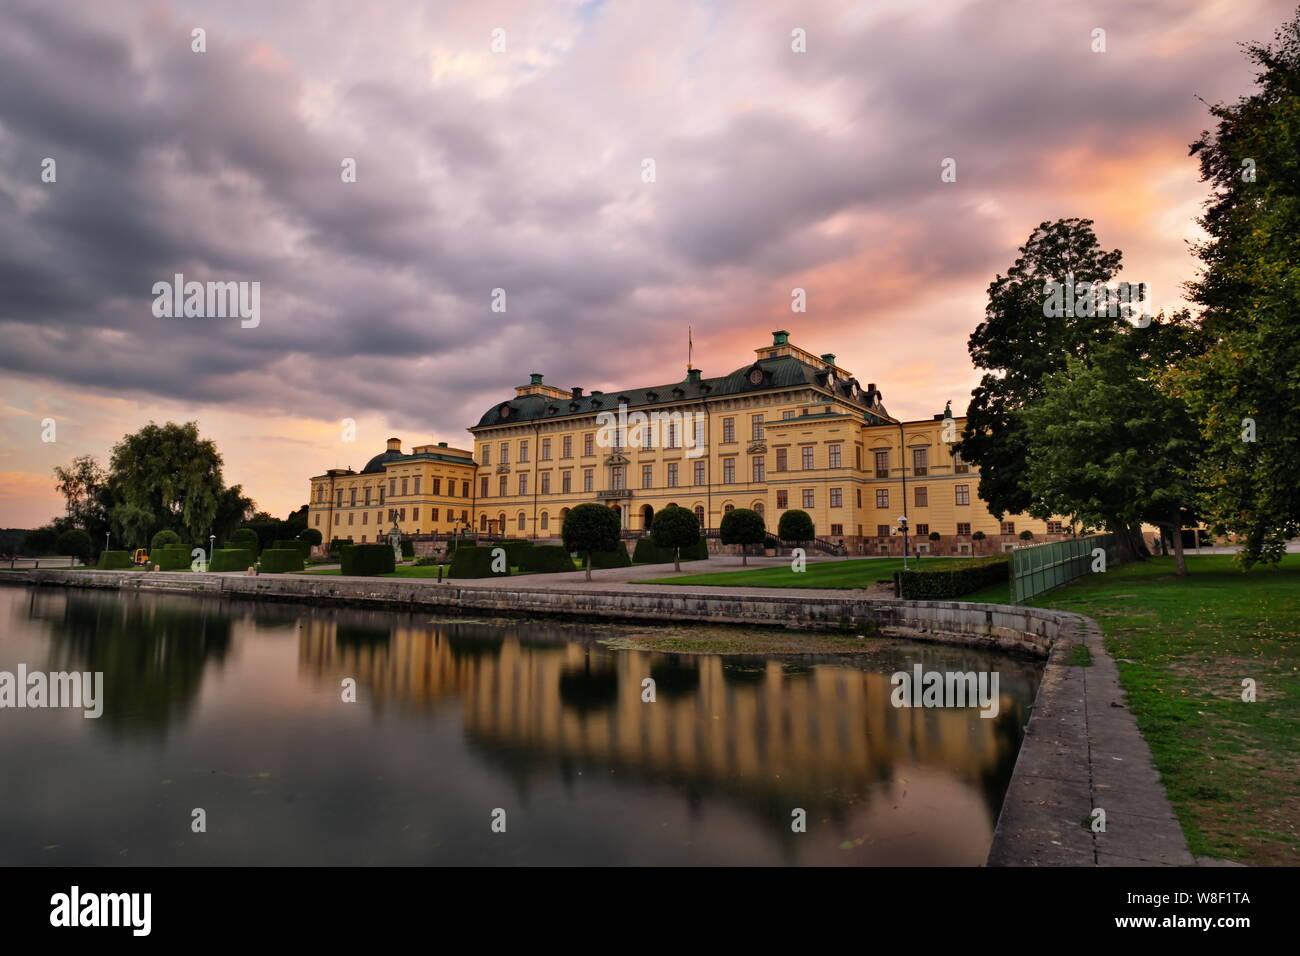 Drottningholm Palace during sunset with reflection in Lake Mälar, Sweden Stock Photo